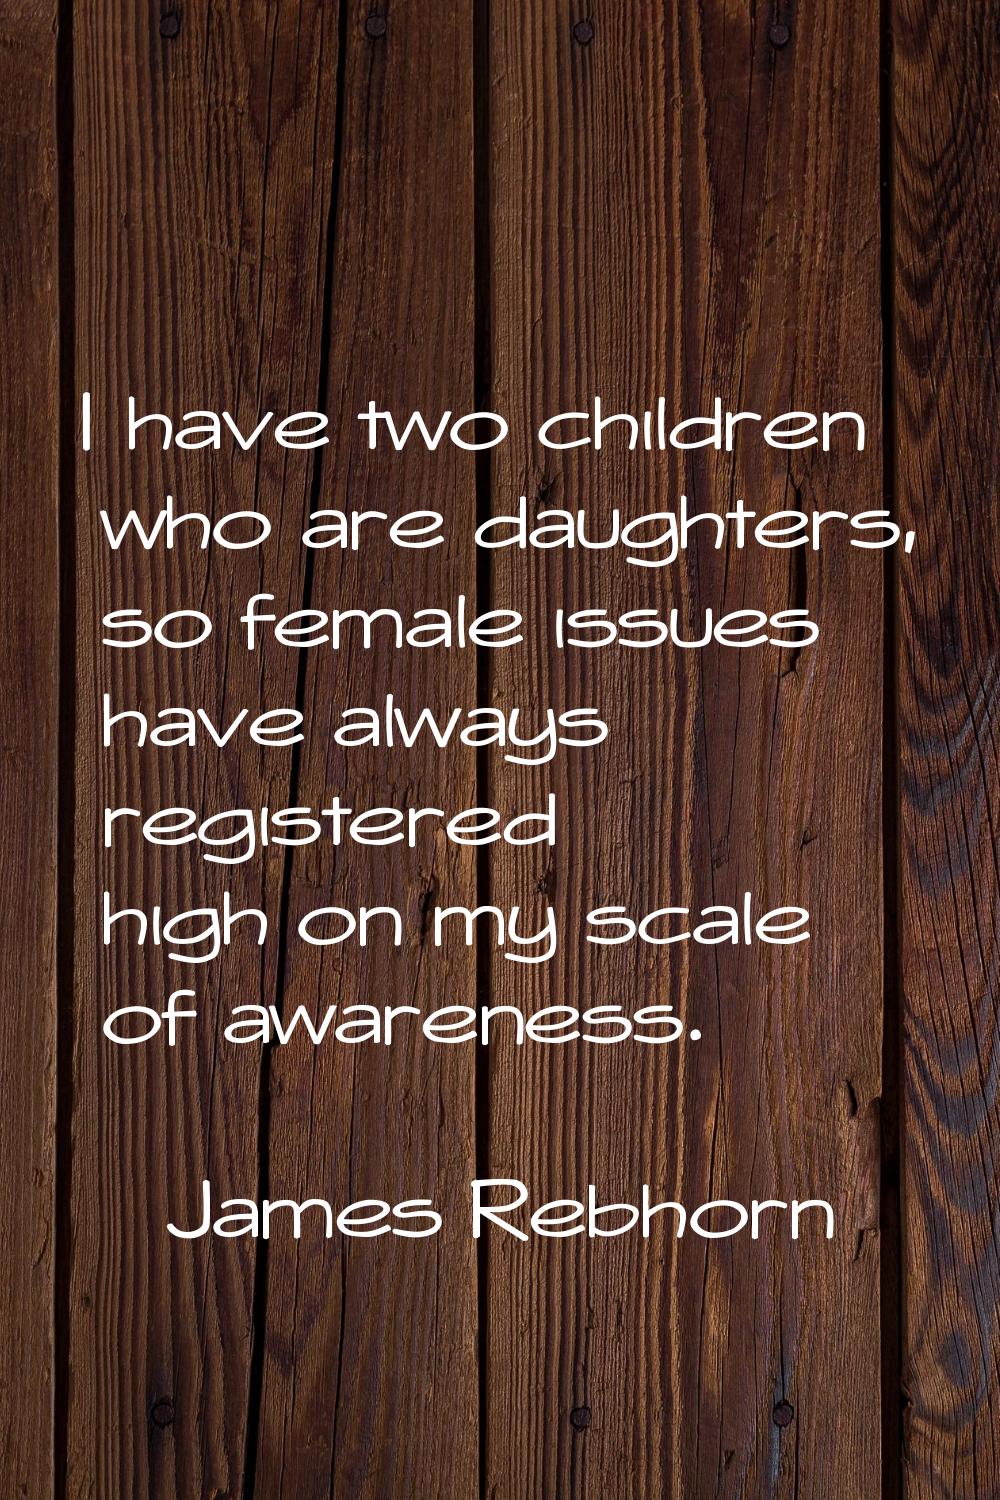 I have two children who are daughters, so female issues have always registered high on my scale of 